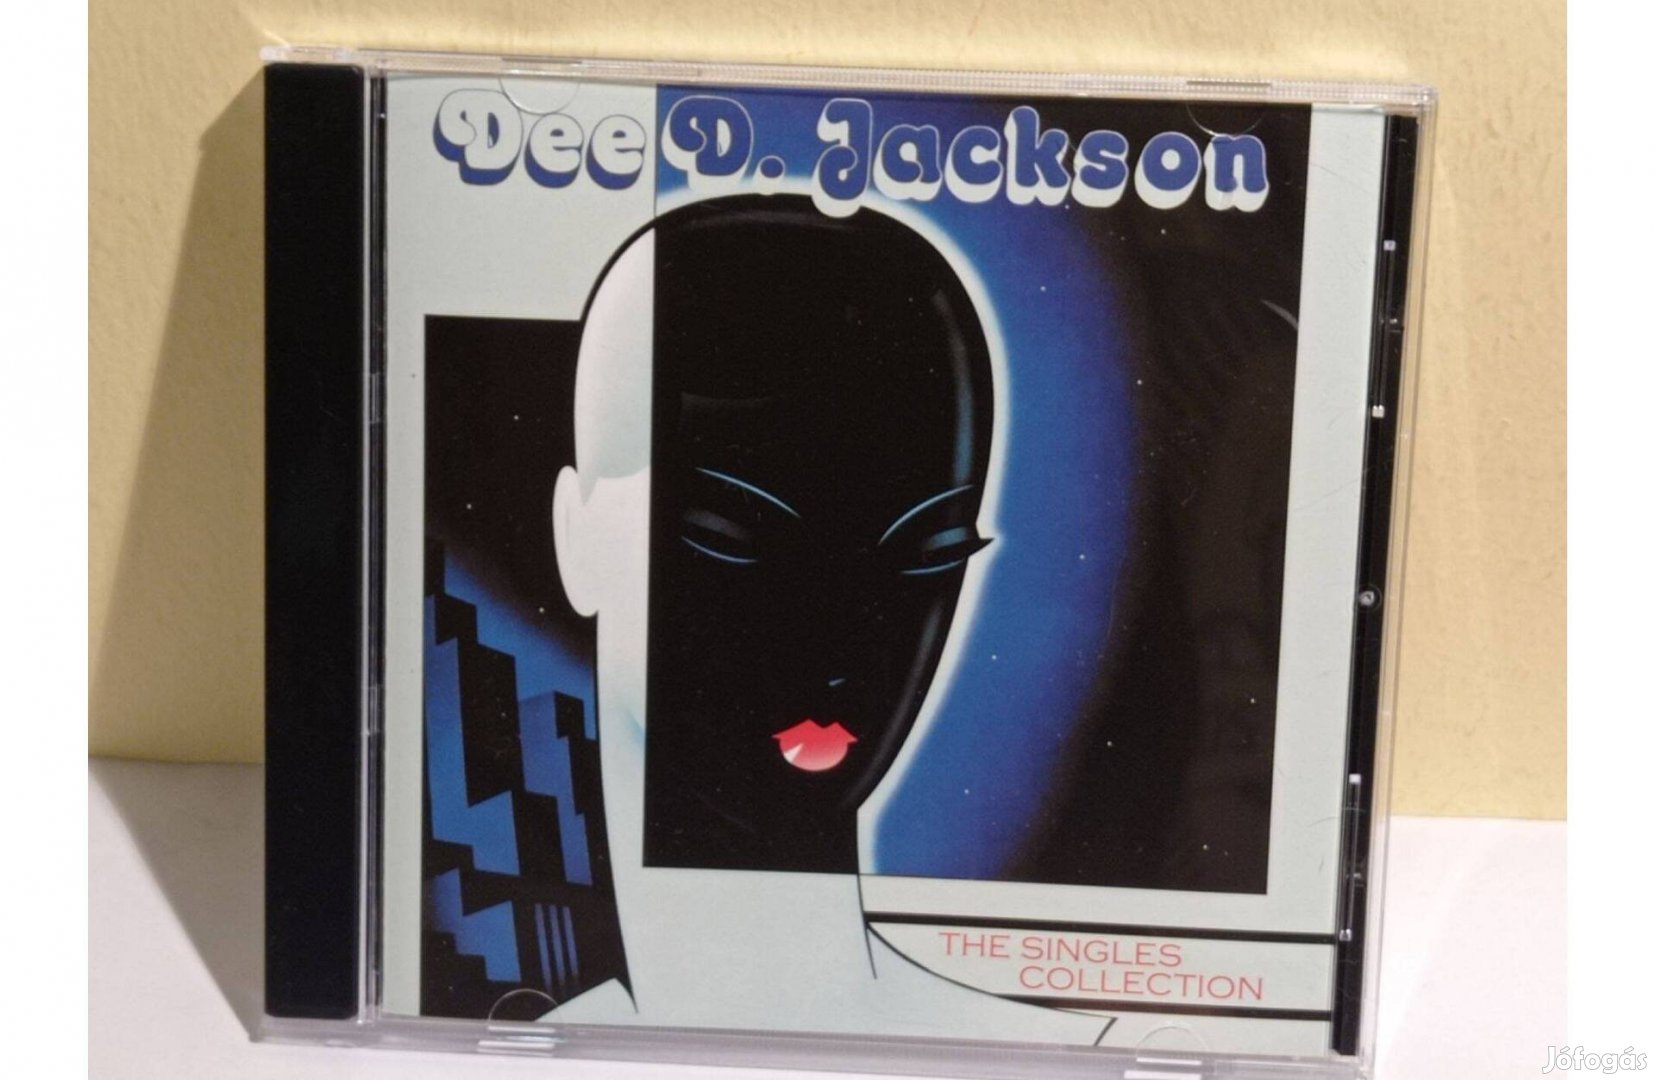 Cd Dee D. Jackson The Singles Collection